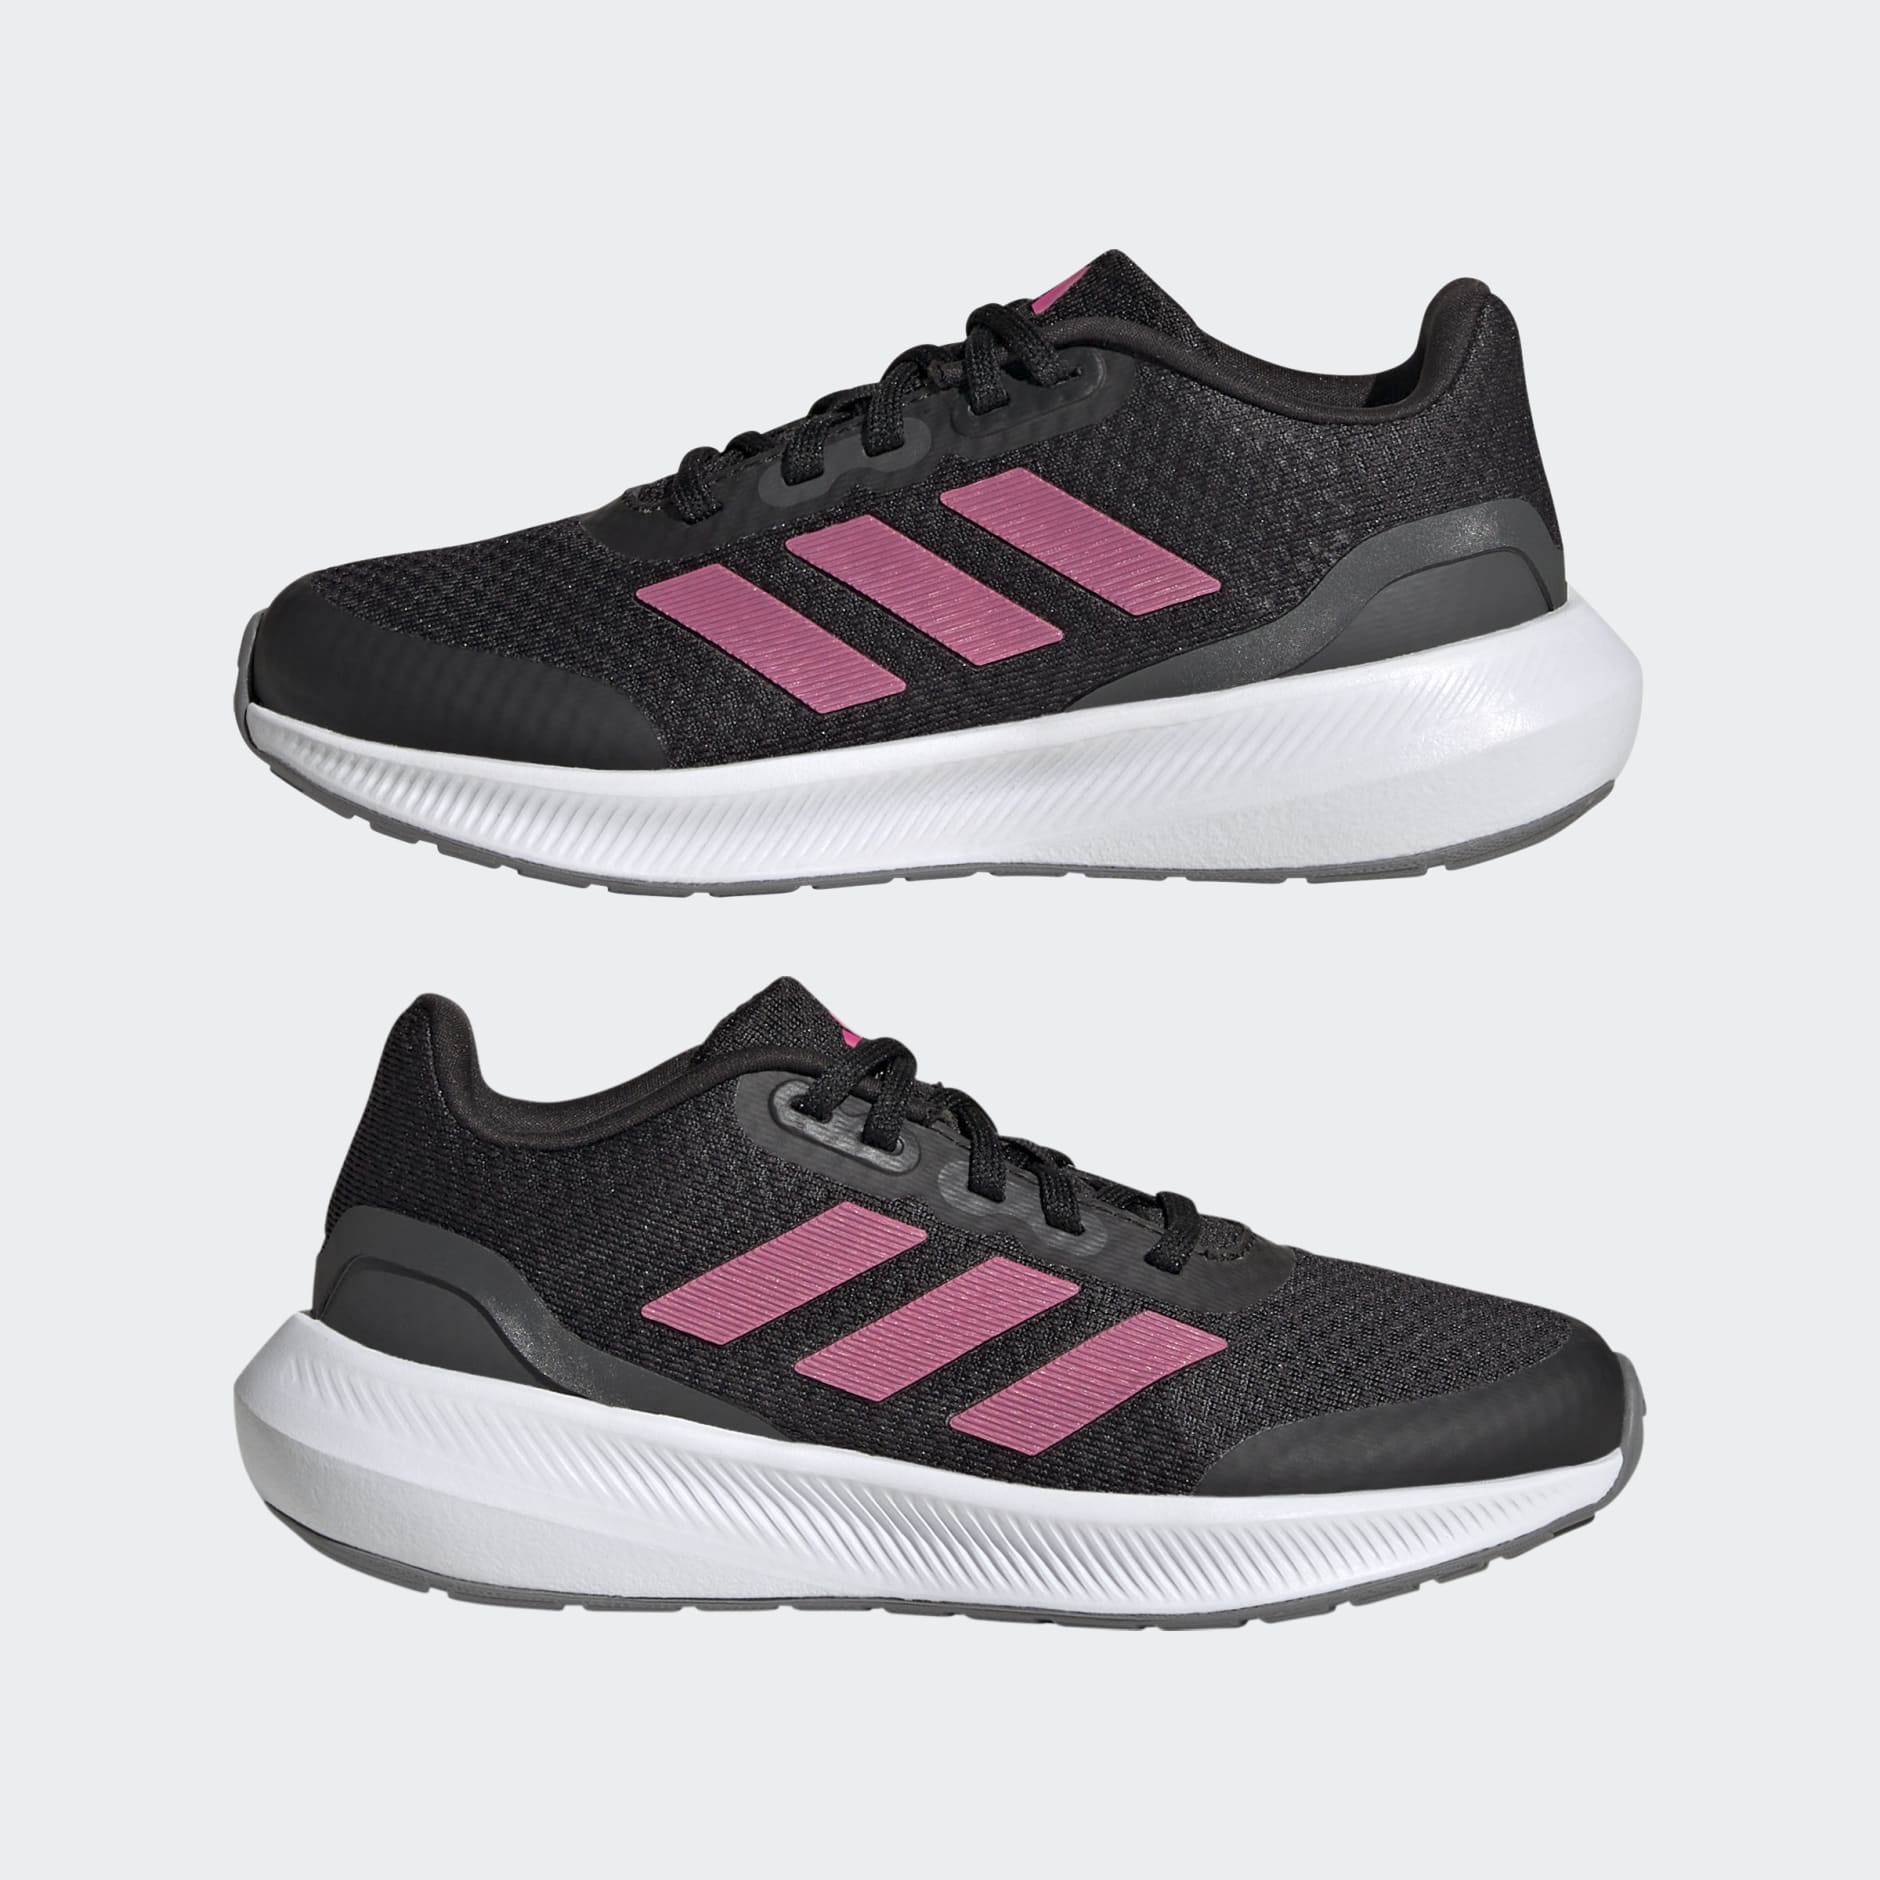 Adidas Womens Questar Ride Mesh Textured Striped Lace-Up Sneakers Pink -  Shop Linda's Stuff